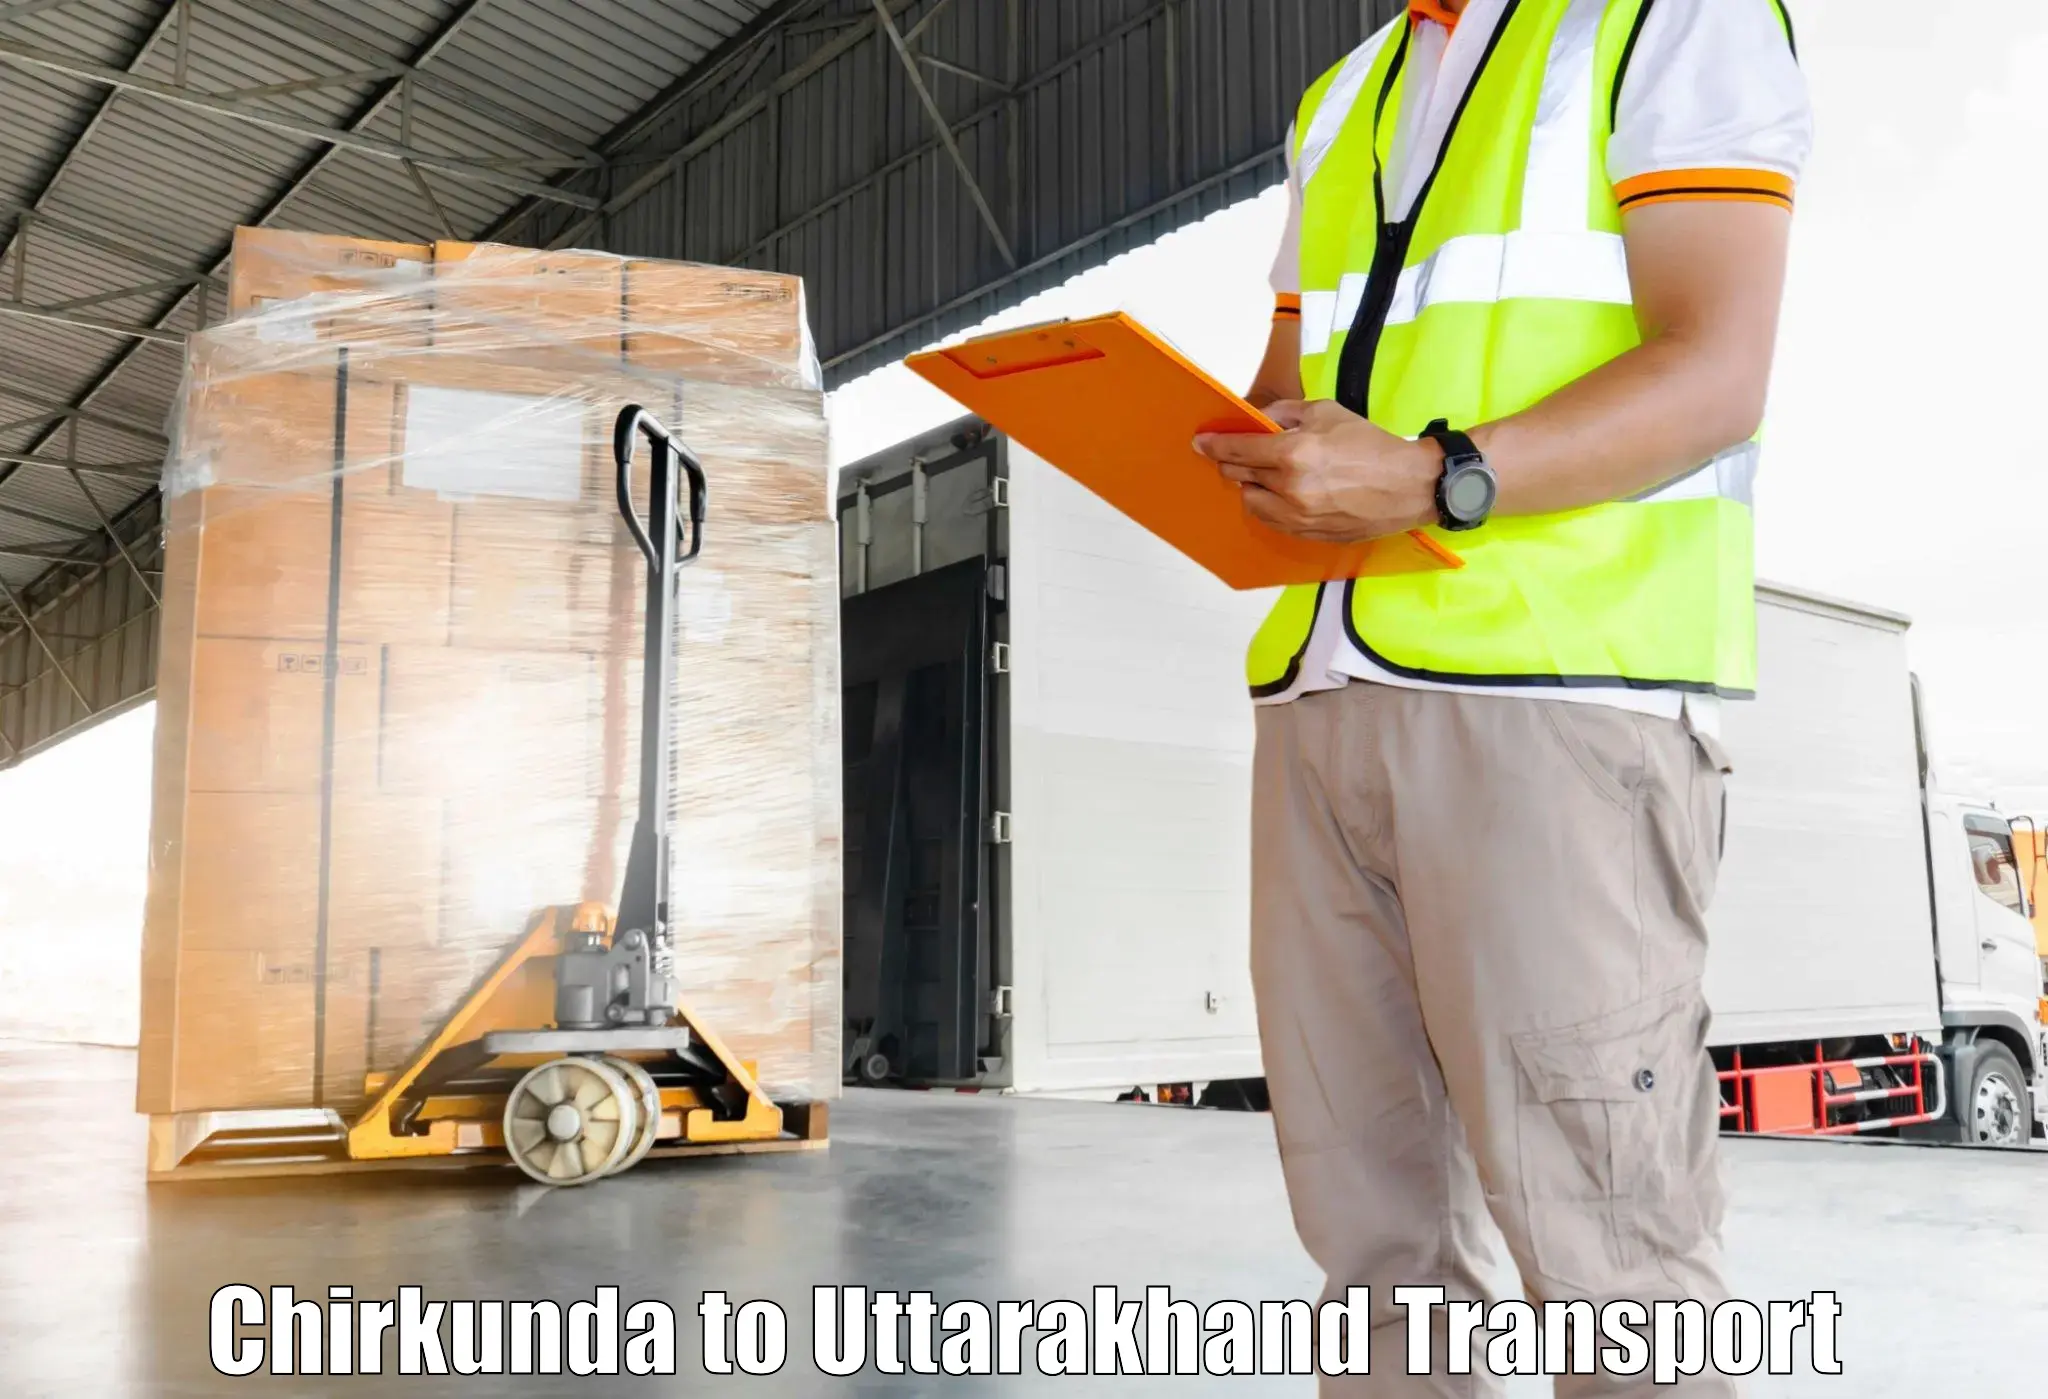 Container transportation services Chirkunda to IIT Roorkee